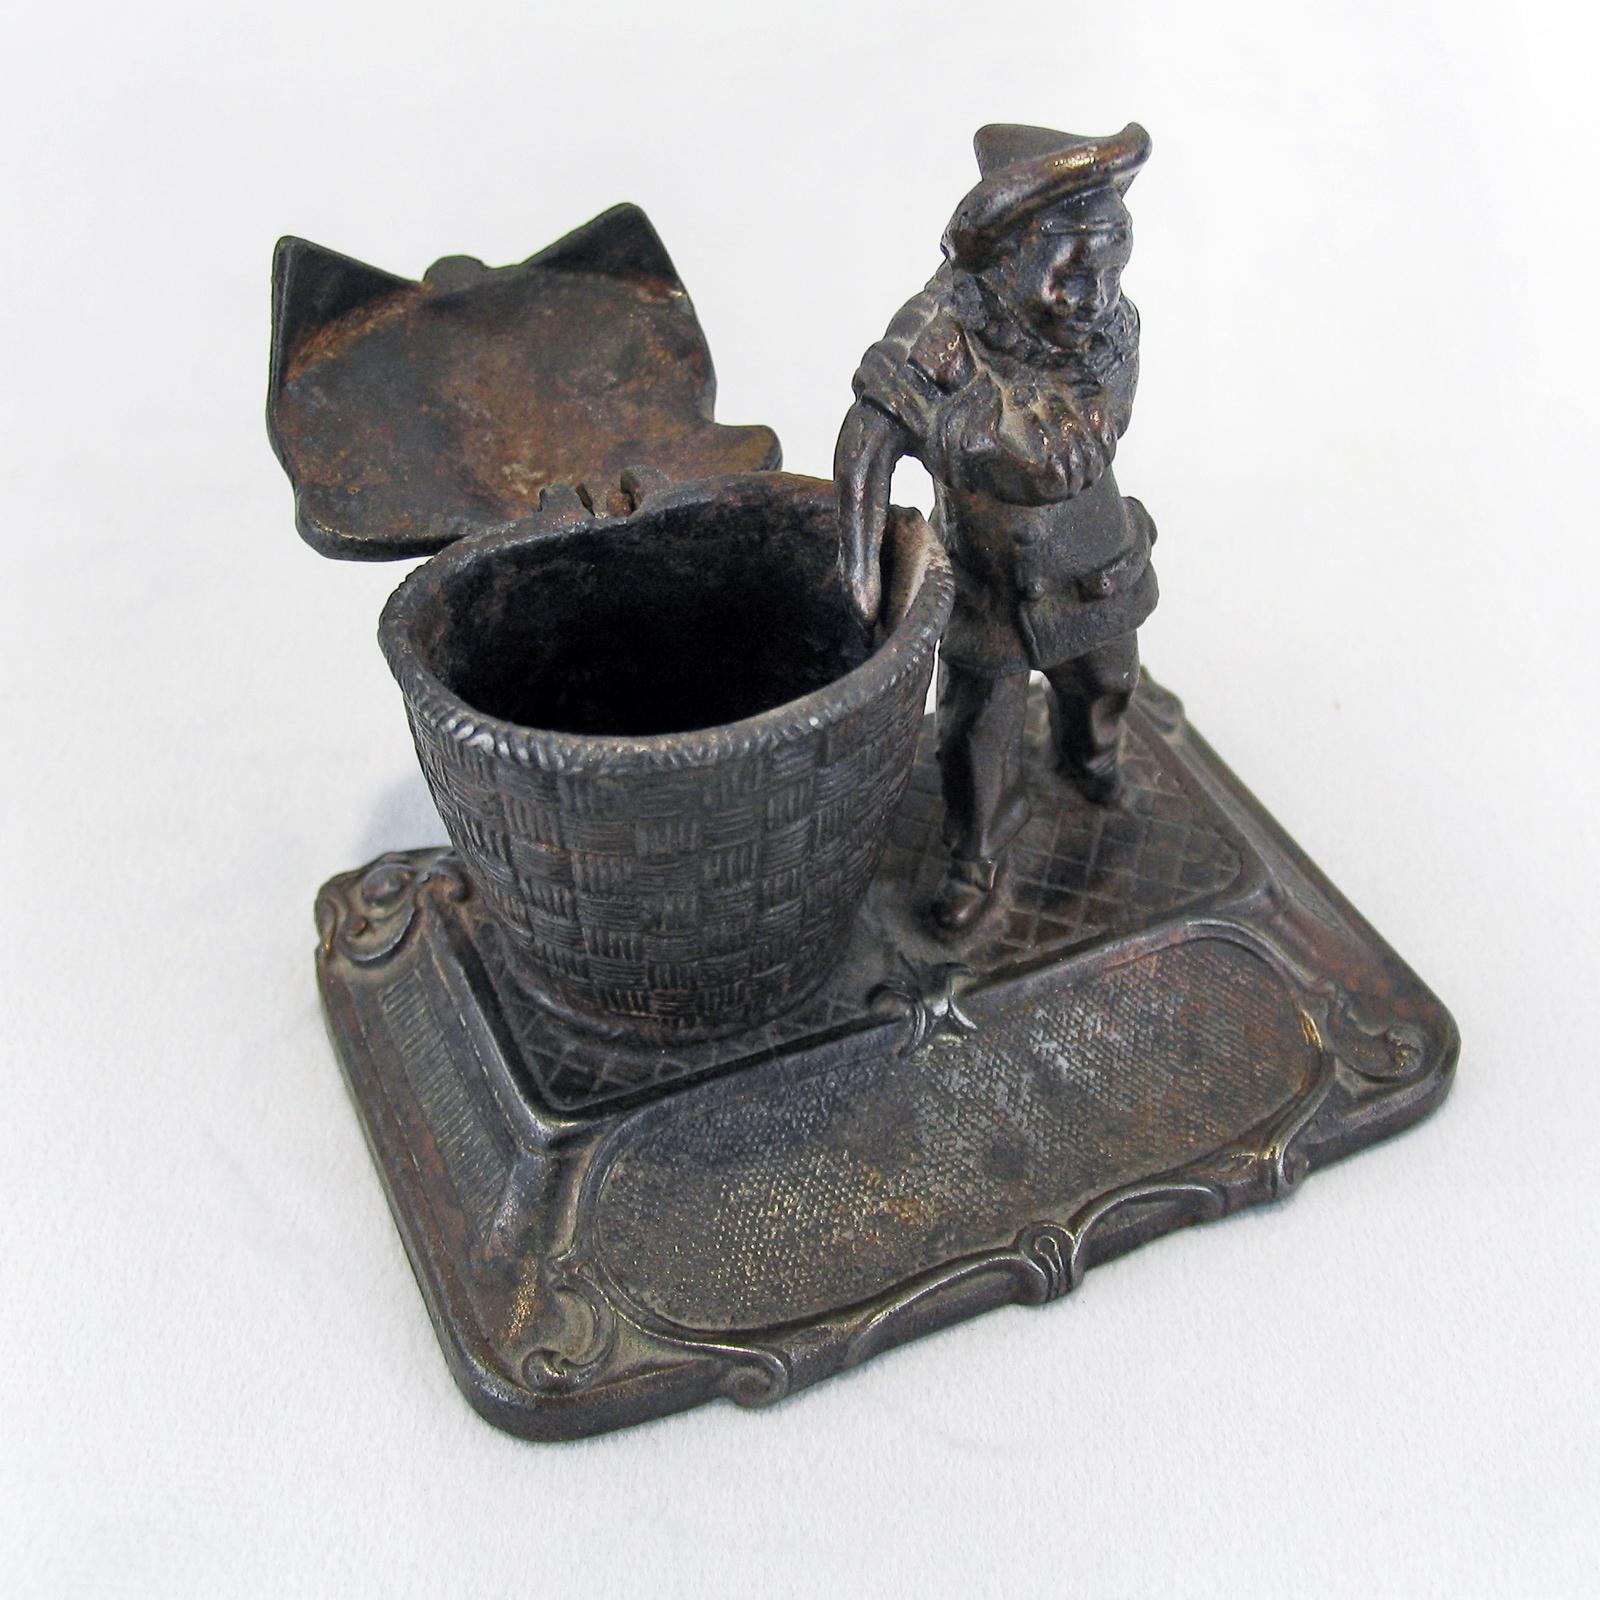 Early 1900 Russian inkwell, depicting a boy sleeping his hand in a basket. Cast metal with dark patina, marked to the bottom. Excellent condition accordingly to its age.
Dimensions: 11 x 9 x 10 cm.